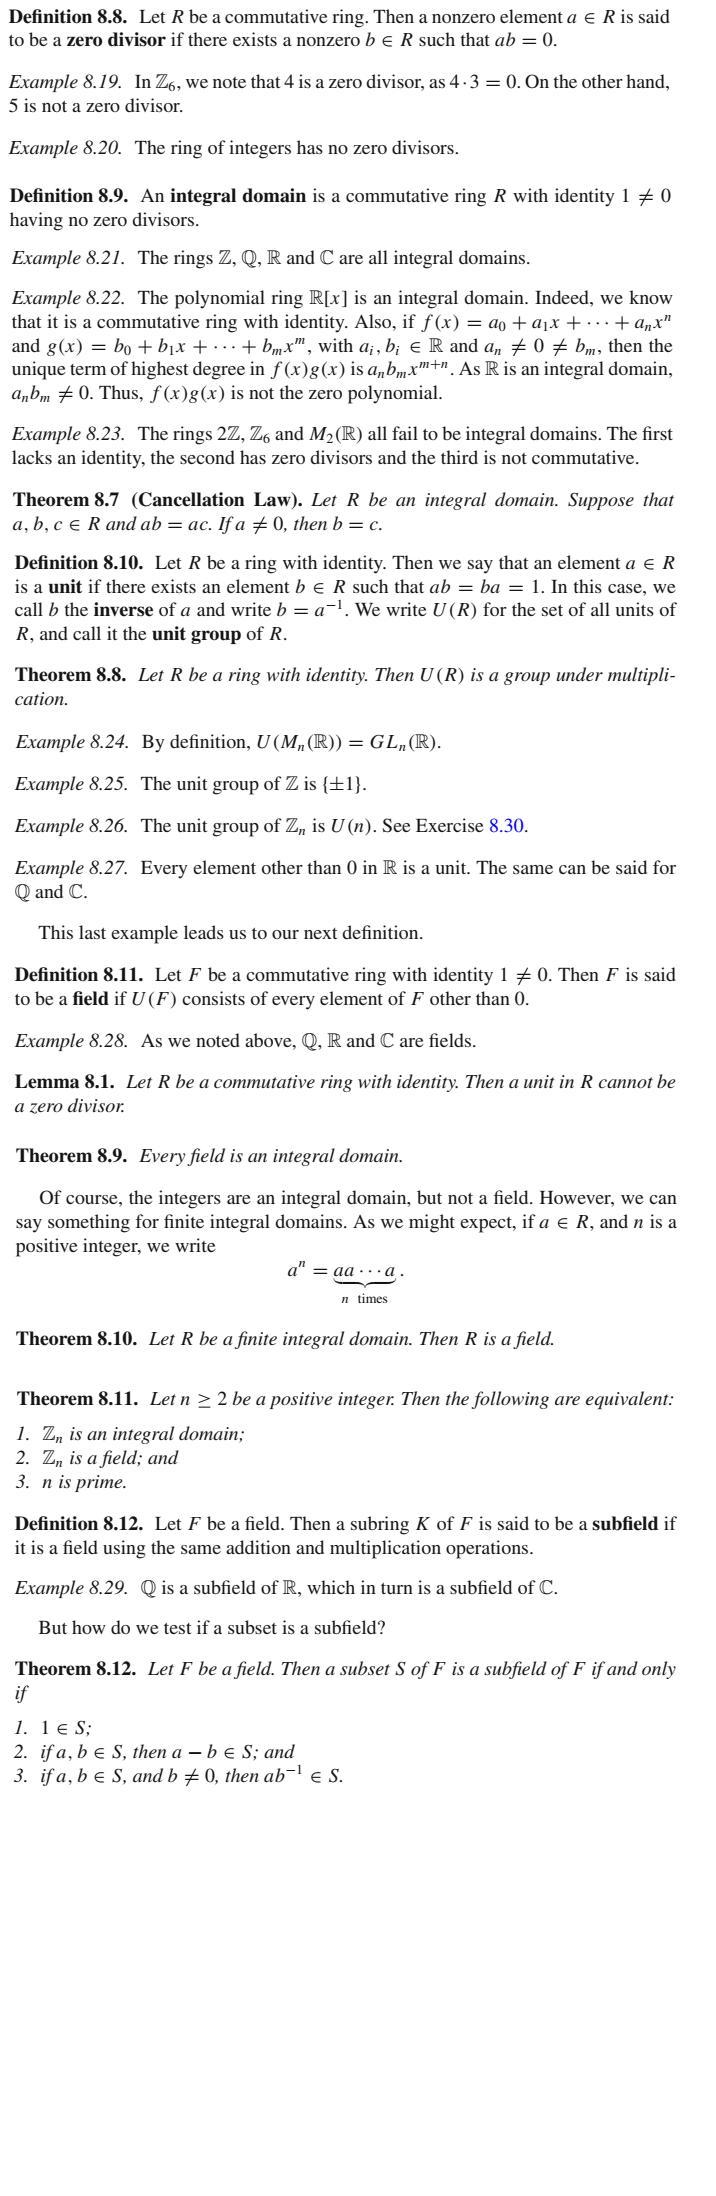 Definition 8.8. Let R be a commutative ring. Then a nonzero element a e R is said
to be a zero divisor if there exists a nonzero b e R such that ab = 0.
Example 8.19. In Z6, we note that 4 is a zero divisor, as 4·3 = 0. On the other hand,
5 is not a zero divisor.
Example 8.20. The ring of integers has no zero divisors.
Definition 8.9. An integral domain is a commutative ring R with identity 1 + 0
having no zero divisors.
Example 8.21. The rings Z, Q, R and C are all integral domains.
Example 8.22. The polynomial ring R[x] is an integral domain. Indeed, we know
that it is a commutative ring with identity. Also, if f (x) = ao + ax + . + a„x"
and g(x) = bo + bịx + · . . + bmx™, with a; , b; e R and an + 0 + bm, then the
unique term of highest degree in ƒ (x)g(x)is a„bmxm+n. As R is an integral domain,
a„bm # 0. Thus, f(x)g(x) is not the zero polynomial.
Example 8.23. The rings 2Z, Z6 and M2(R) all fail to be integral domains. The first
lacks an identity, the second has zero divisors and the third is not commutative.
Theorem 8.7 (Cancellation Law). Let R be an integral domain. Suppose that
a, b, c e R and ab = ac. If a +0, then b = c.
Definition 8.10. Let R be a ring with identity. Then we say that an element a e R
is a unit if there exists an element b e R such that ab = ba = 1. In this case, we
call b the inverse of a and write b = a-l. We write U (R) for the set of all units of
R, and call it the unit group of R.
Theorem 8.8. Let R be a ring with identity. Then U (R) is a group under multipli-
cation.
Example 8.24. By definition, U (M„(R)) = GL„(R).
Example 8.25. The unit group of Z is {±1}.
Example 8.26. The unit group of Z, is U (n). See Exercise 8.30.
Example 8.27. Every element other than 0 in R is a unit. The same can be said for
Q and C.
This last example leads us to our next definition.
Definition 8.11. Let F be a commutative ring with identity 1 7 0. Then F is said
to be a field if U (F) consists of every element of F other than 0.
Example 8.28. As we noted above, Q, R and C are fields.
Lemma 8.1. Let R be a commutative ring with identity. Then a unit in R cannot be
a zero divisor.
Theorem 8.9. Every field is an integral domain.
Of course, the integers are an integral domain, but not a field. However, we can
say something for finite integral domains. As we might expect, if a e R, and n is a
positive integer, we write
a" = aa ·· .a
n times
Theorem 8.10. Let R be a finite integral domain. Then R is a field.
Theorem 8.11. Let n > 2 be a positive integer. Then the following are equivalent:
1. Z, is an integral domain;
2. Z, is a field; and
3. n is prime.
Definition 8.12. Let F be a field. Then a subring K of F is said to be a subfield if
it is a field using the same addition and multiplication operations.
Example 8.29. Q is a subfield of R, which in turn is a subfield of C.
But how do we test if a subset is a subfield?
Theorem 8.12. Let F be a field. Then a subset S of F is a subfield of F if and only
if
1. 1 e S;
2. if a, b e S, then a – b e S; and
3. if a, b e S, and b ± 0, then ab¬l e S.
